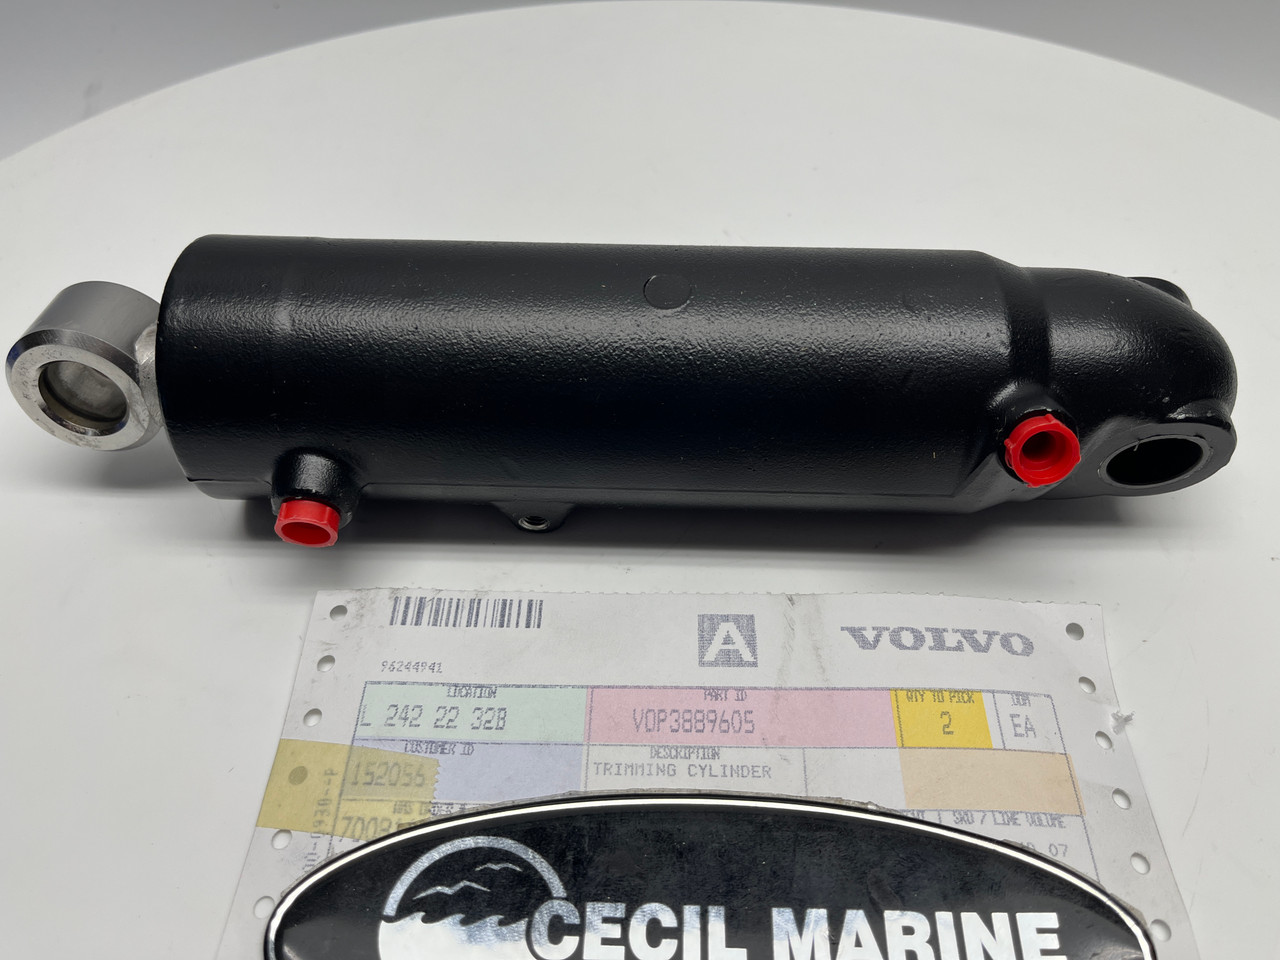 $799.99* GENUINE VOLVO no tax* XDP TRIMMING CYLINDER 3889605 *In Stock & Ready To Ship!